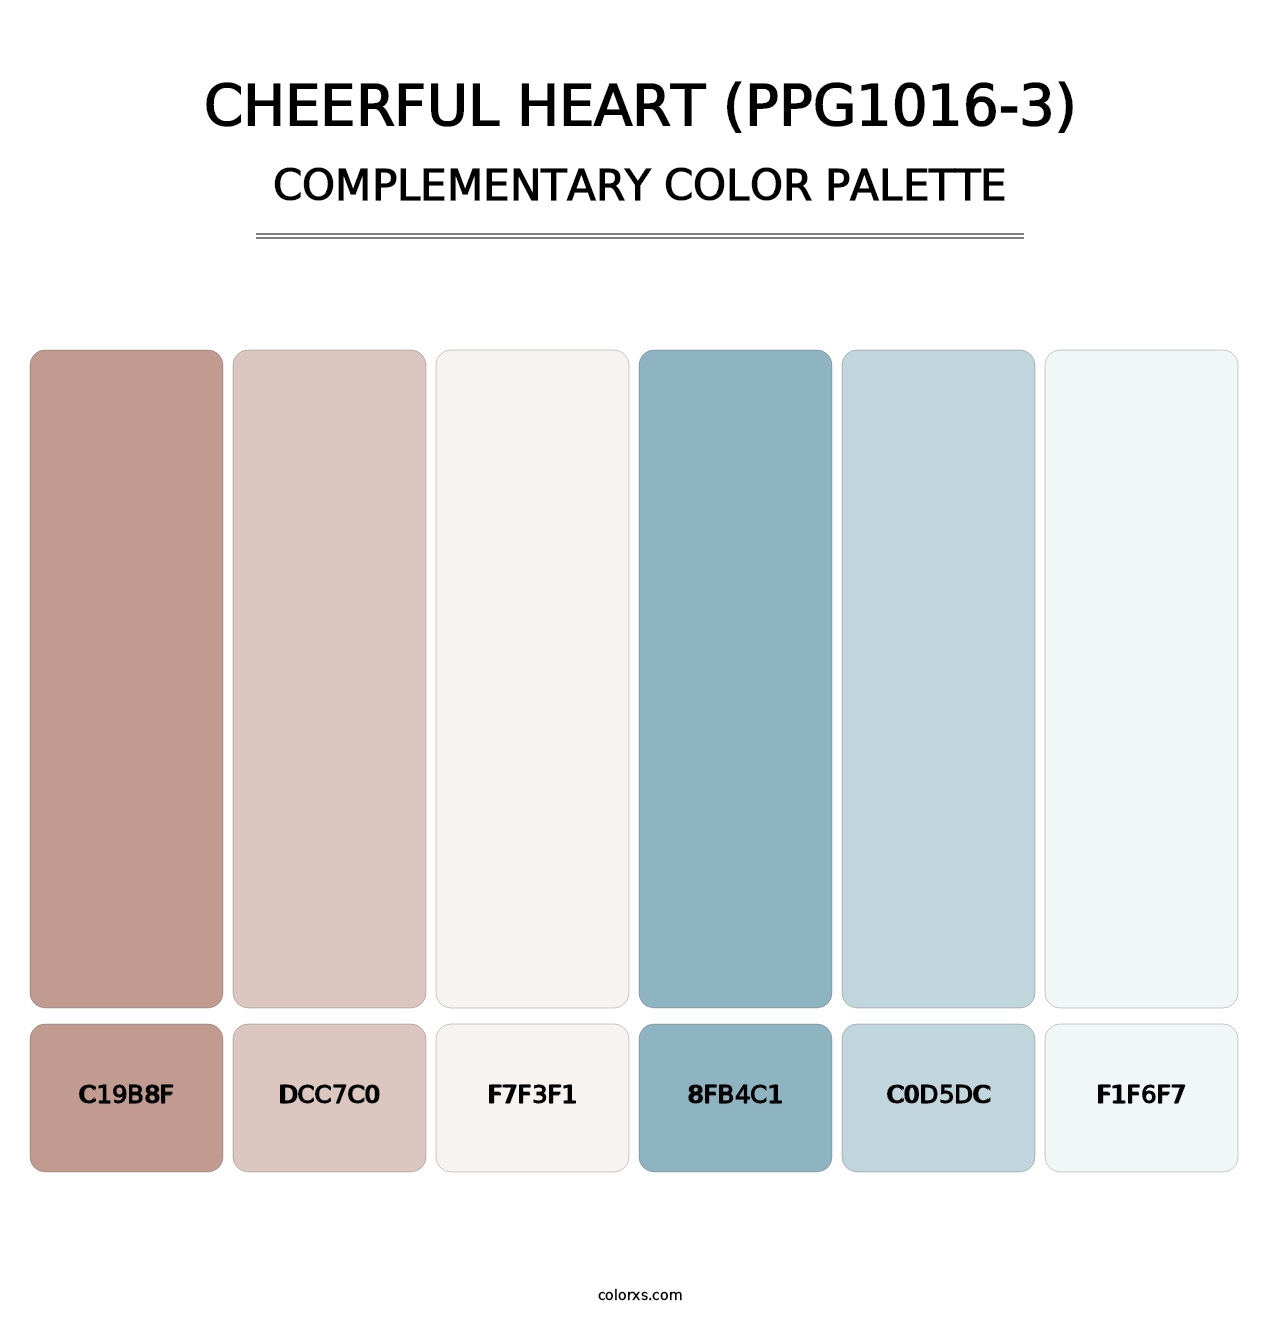 Cheerful Heart (PPG1016-3) - Complementary Color Palette